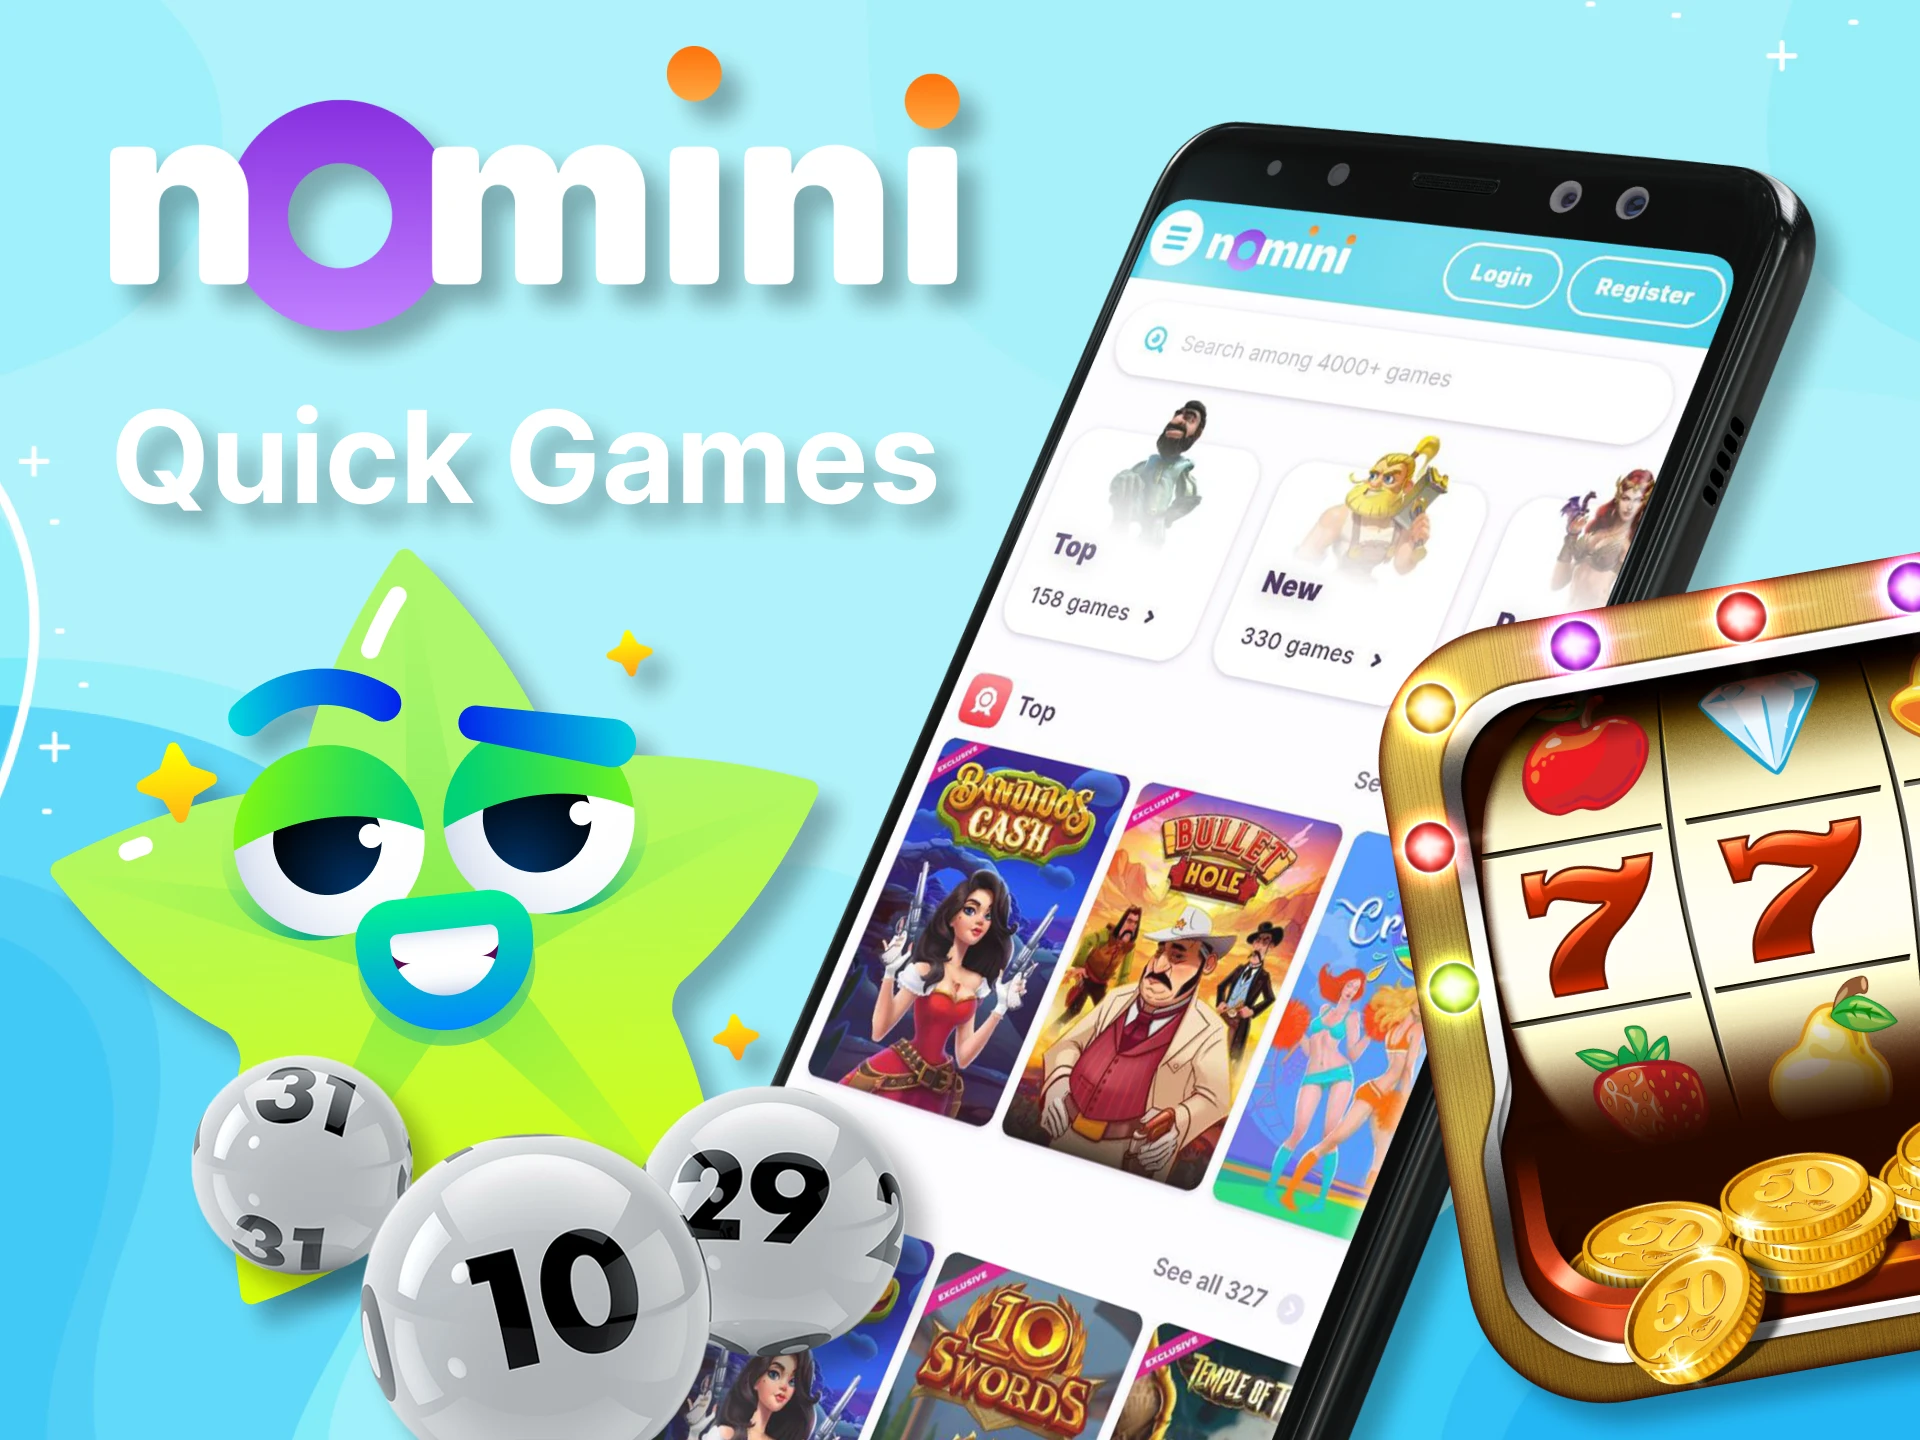 In the Nomini app, try quick games in the casino section.